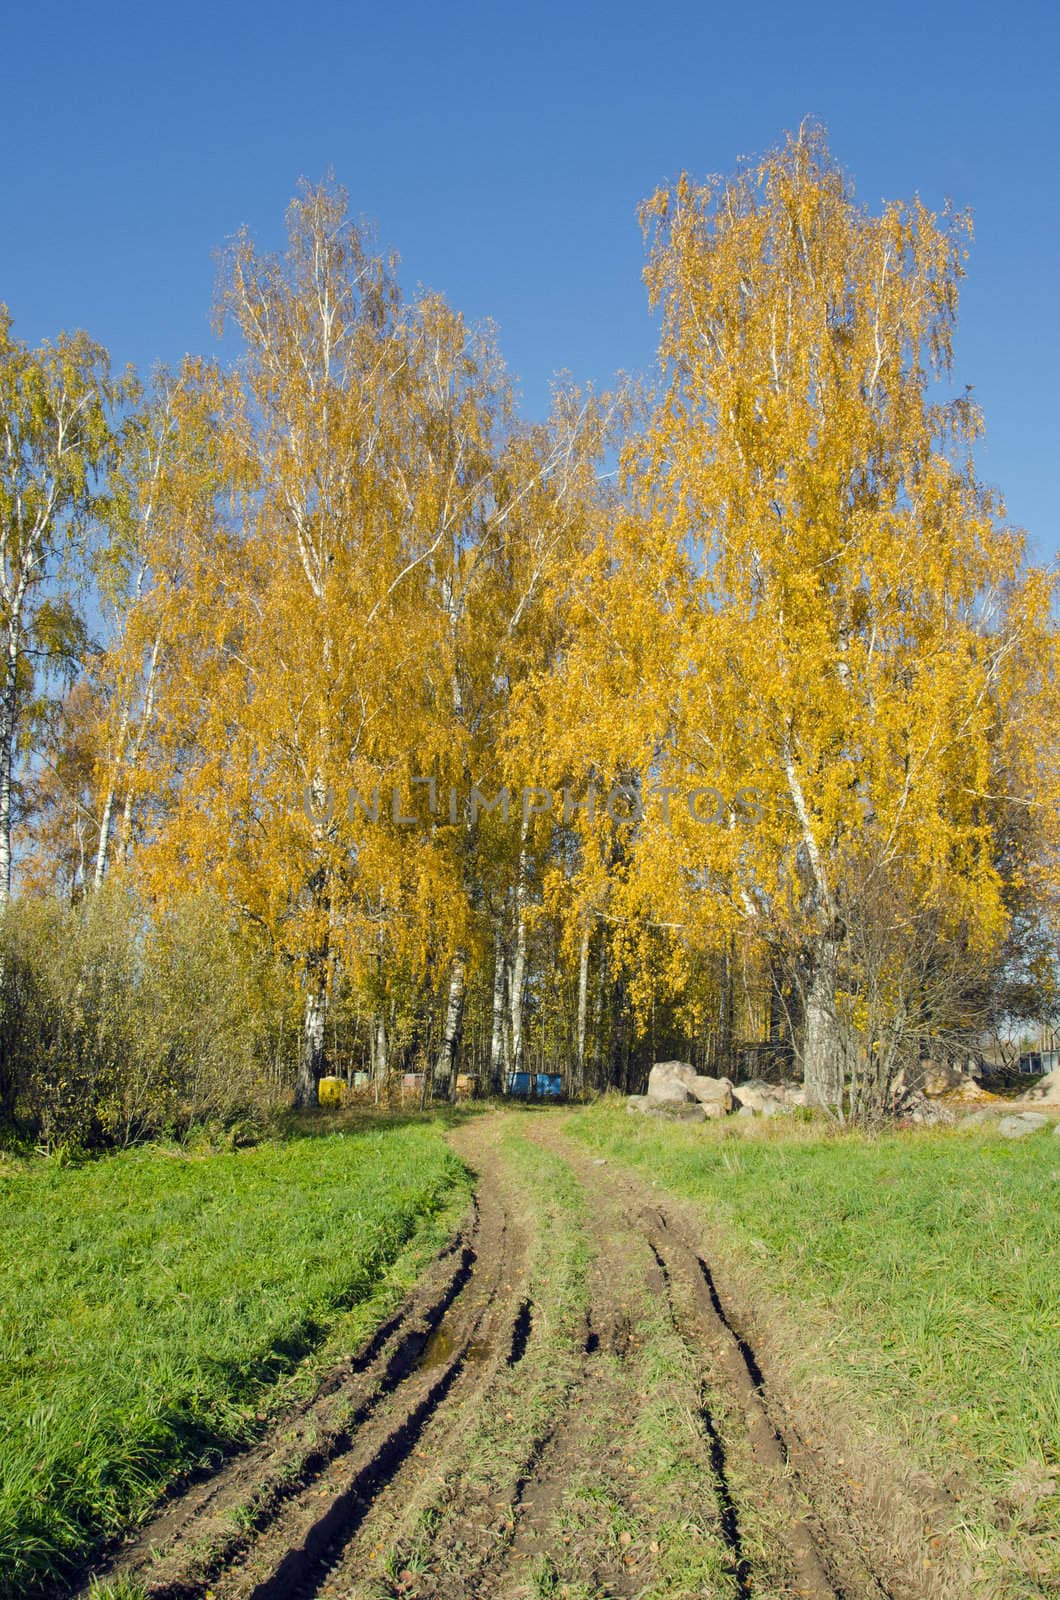 Rural road autumn birches and hives near them. by sauletas